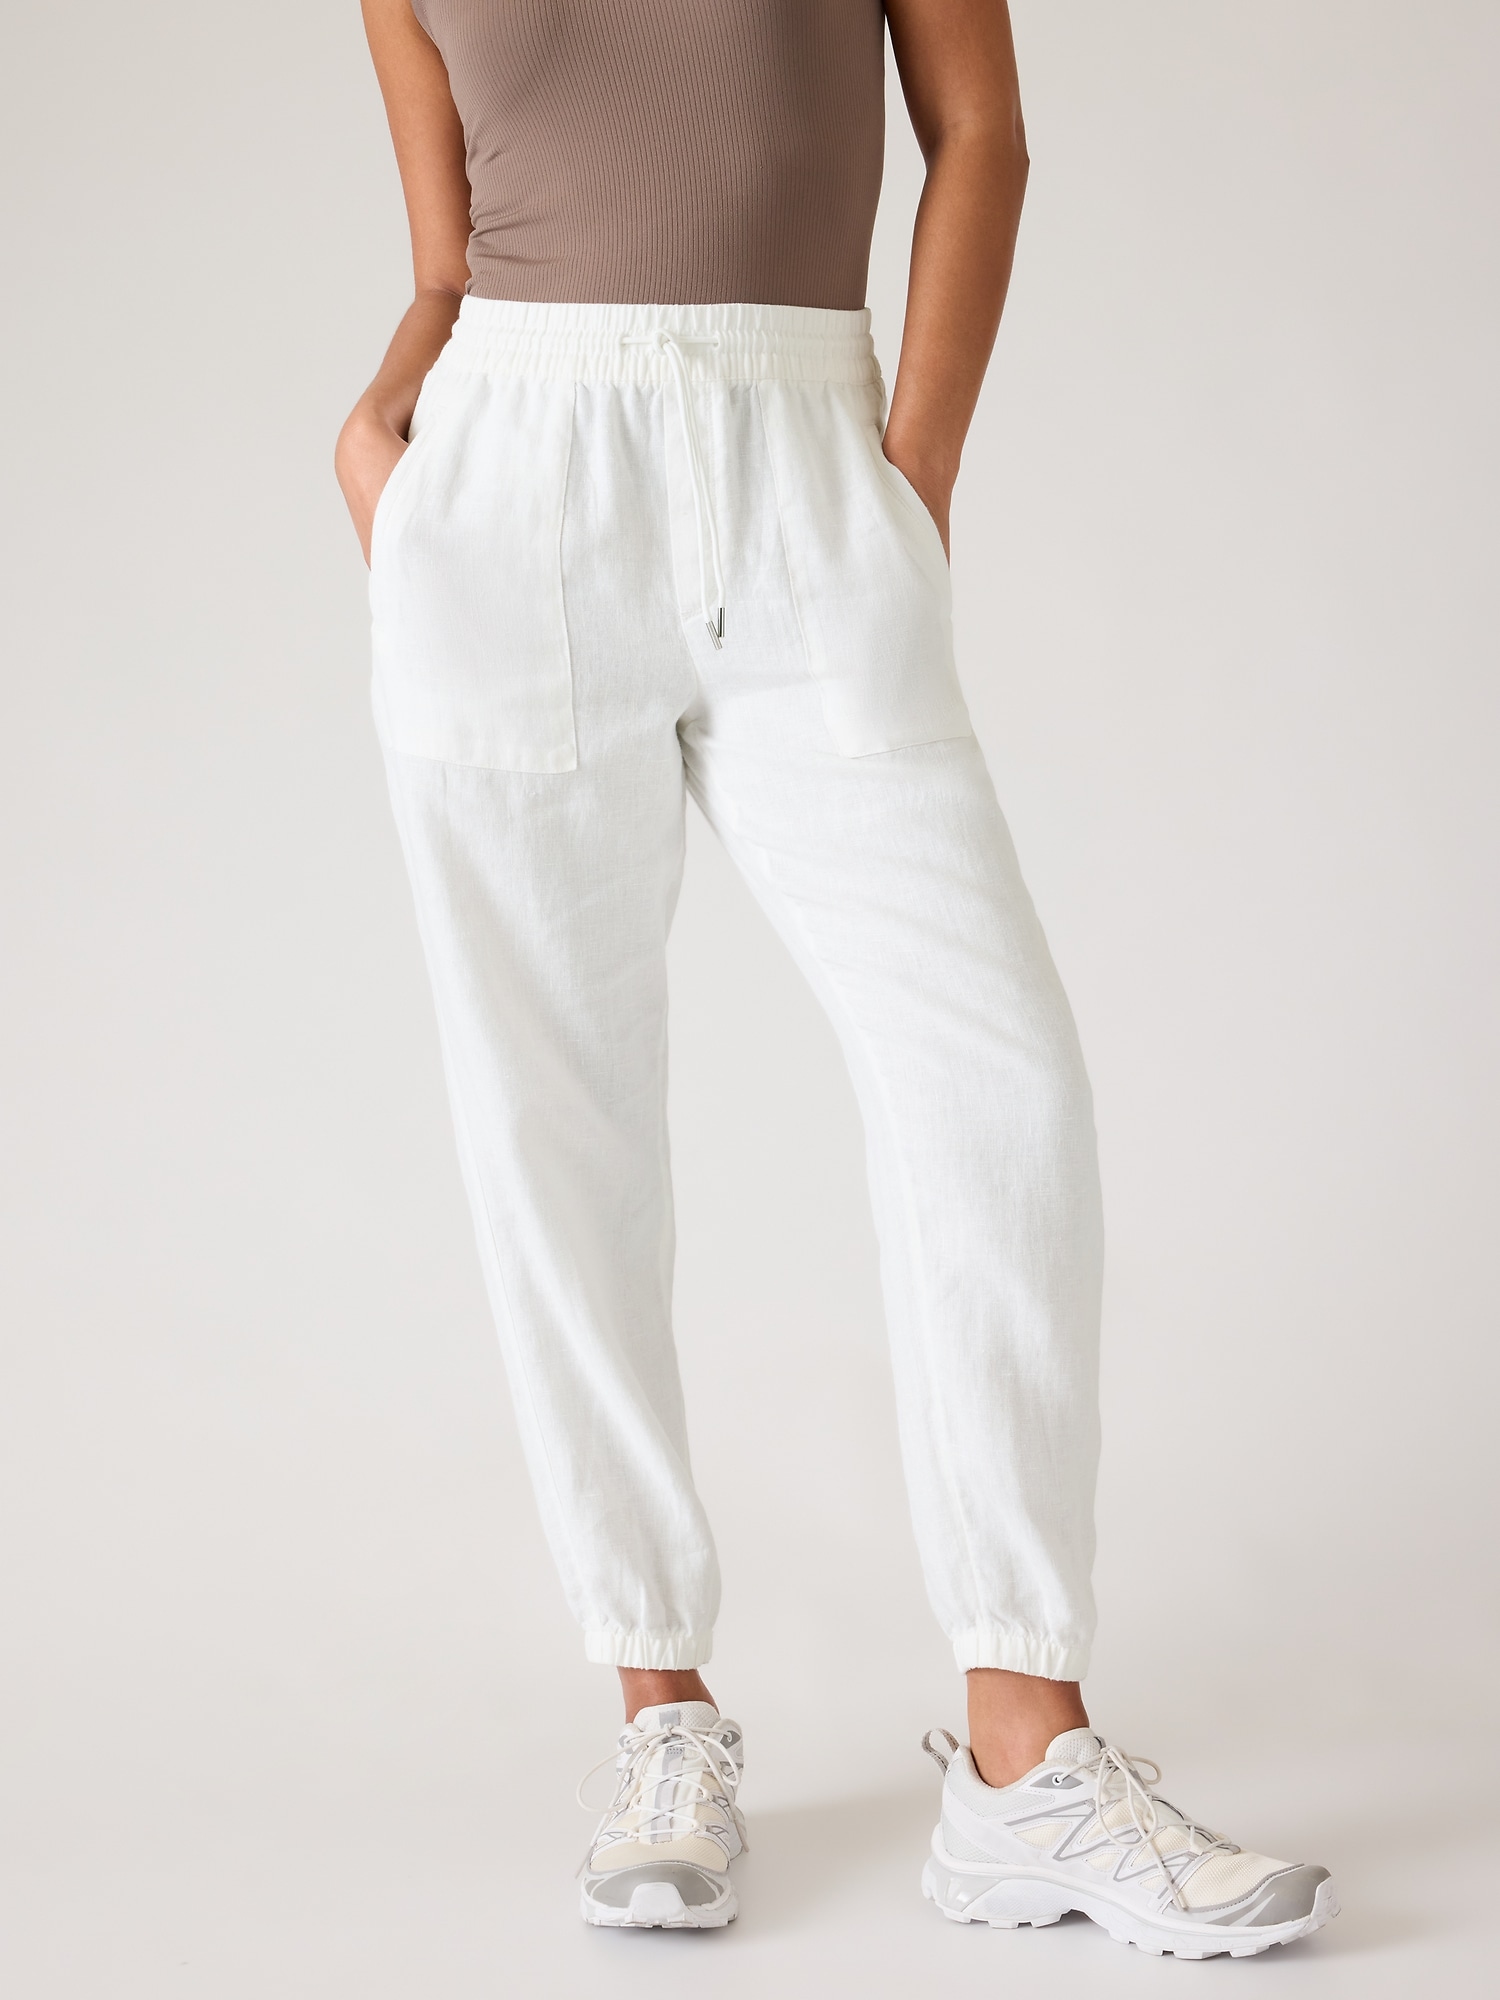 Athleta Solid White Active Pants Size XL - 67% off